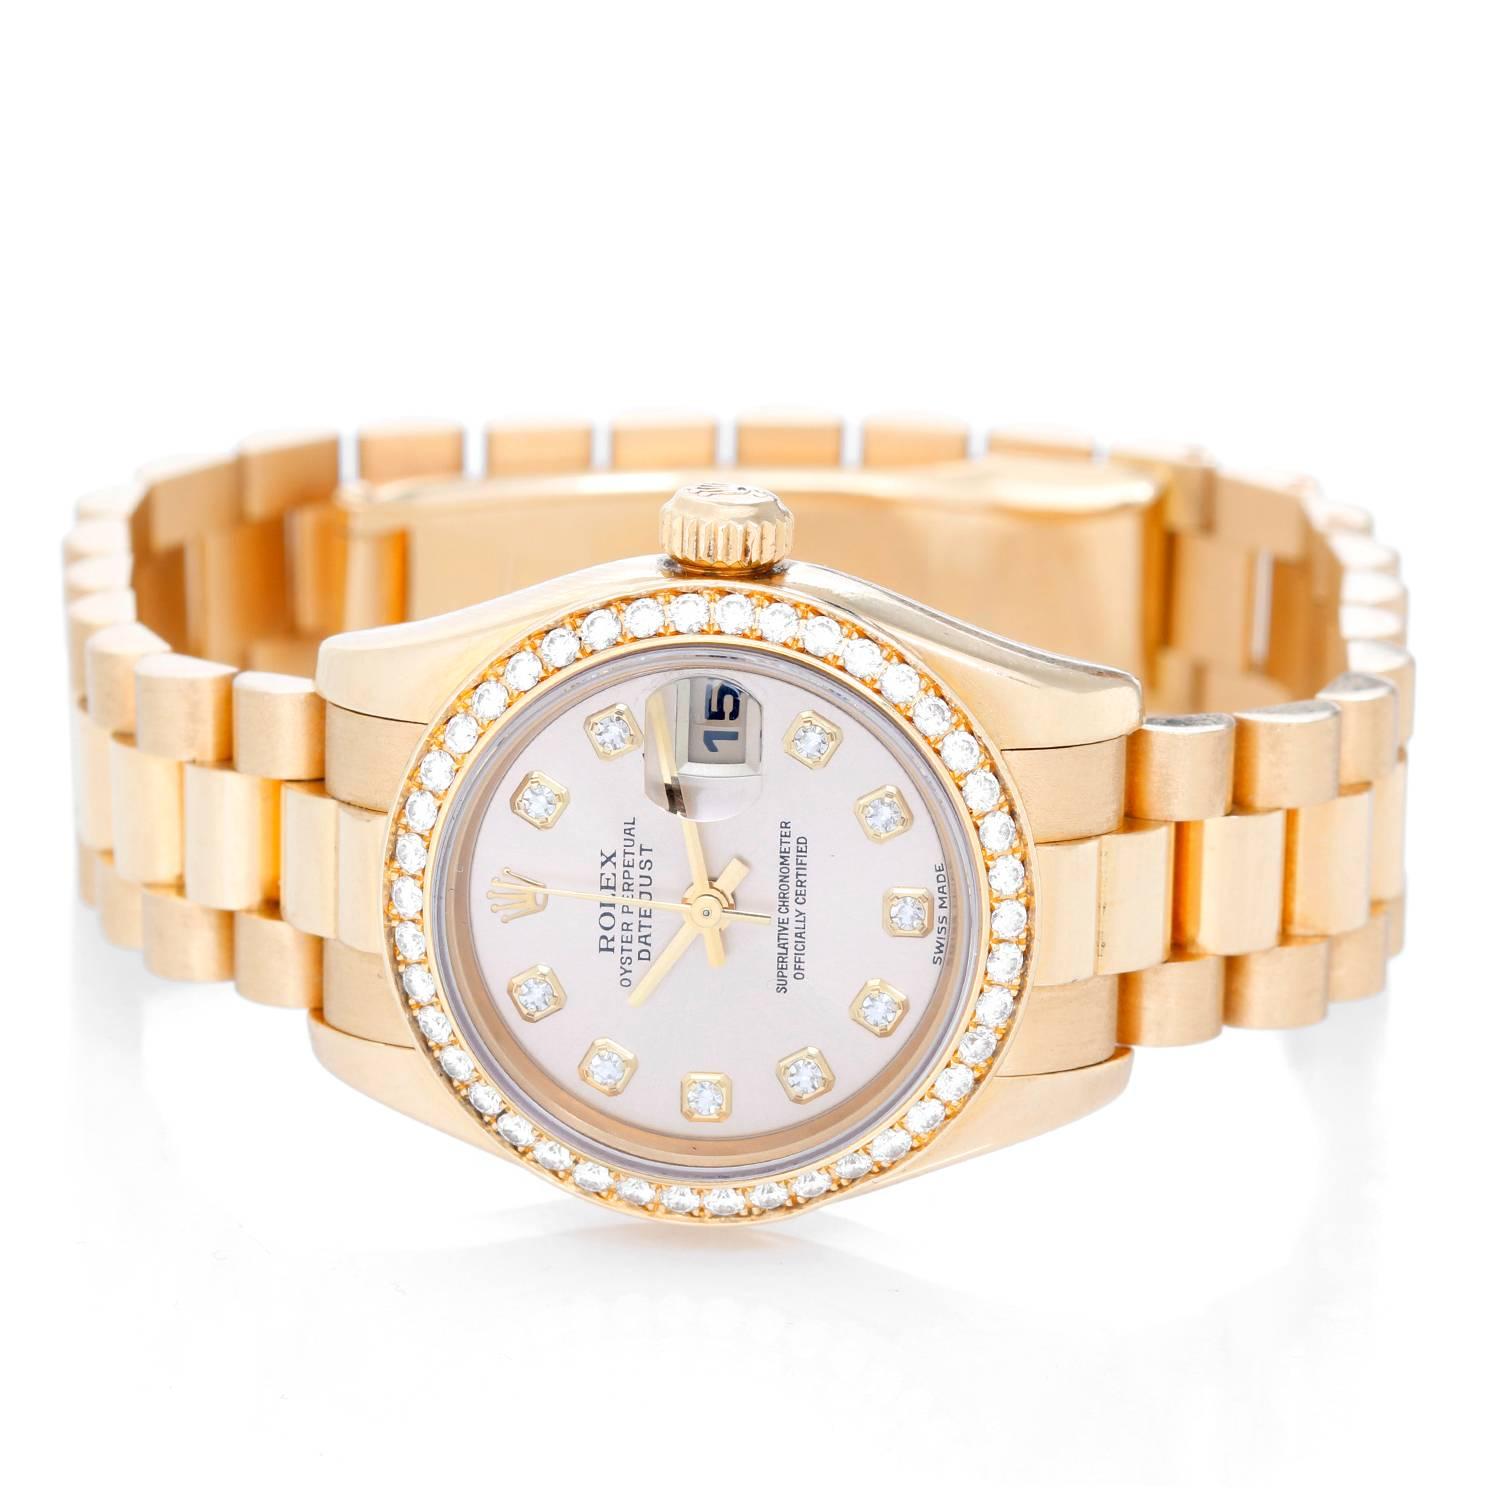 Ladies Rolex President 18k Yellow Gold Diamond Watch 179138 -  Automatic winding, 31 jewels, Quickset date, sapphire crystal. 18k yellow gold case with factory diamond bezel (26mm diameter). Silver  dial with factory diamond hour marker. 18k yellow